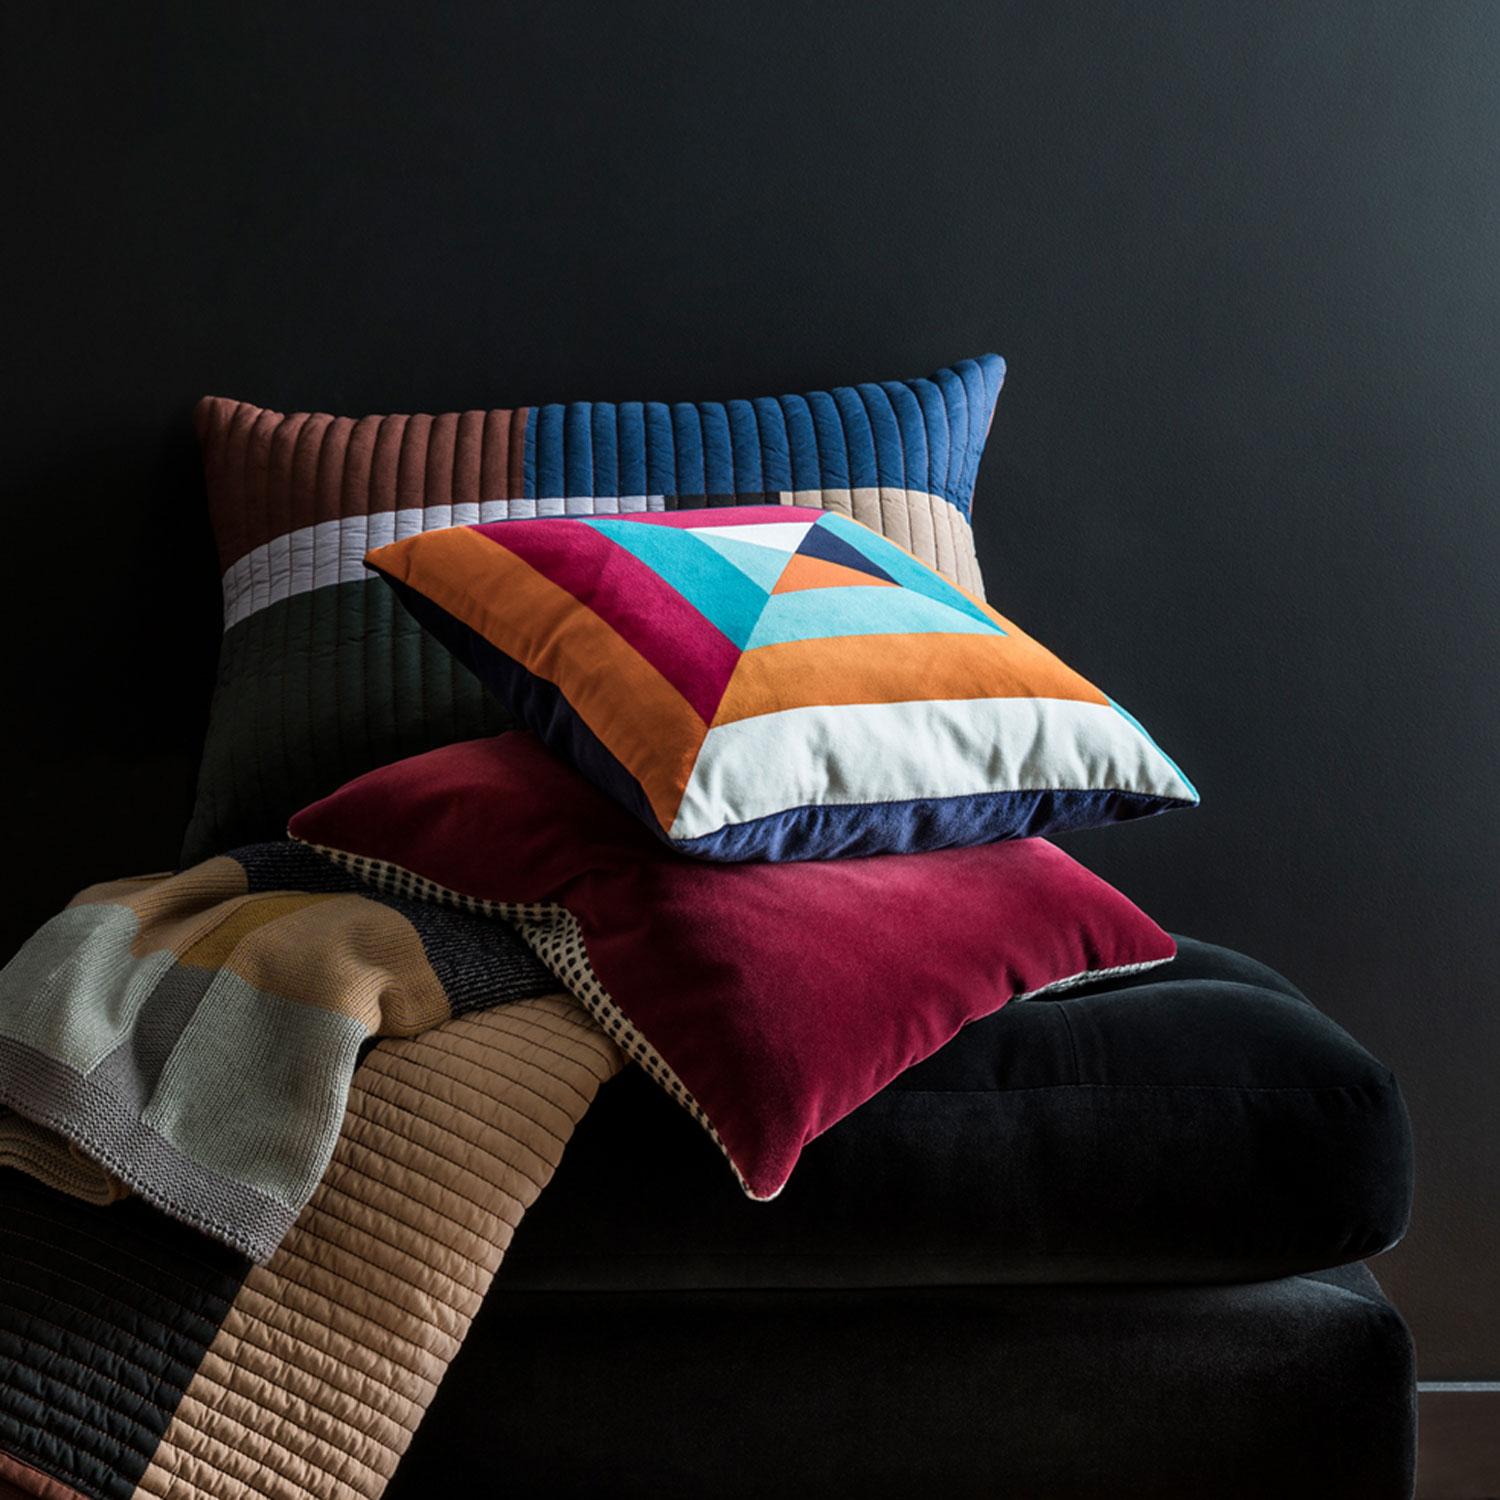 The Skye cushion is inspired by the traditions of Japanese origami. Playing with block sequence patterns and colours the result is a vibrant printed velvet cushion. The rich, bold colour palette creates a striking piece with a contemporary edge that